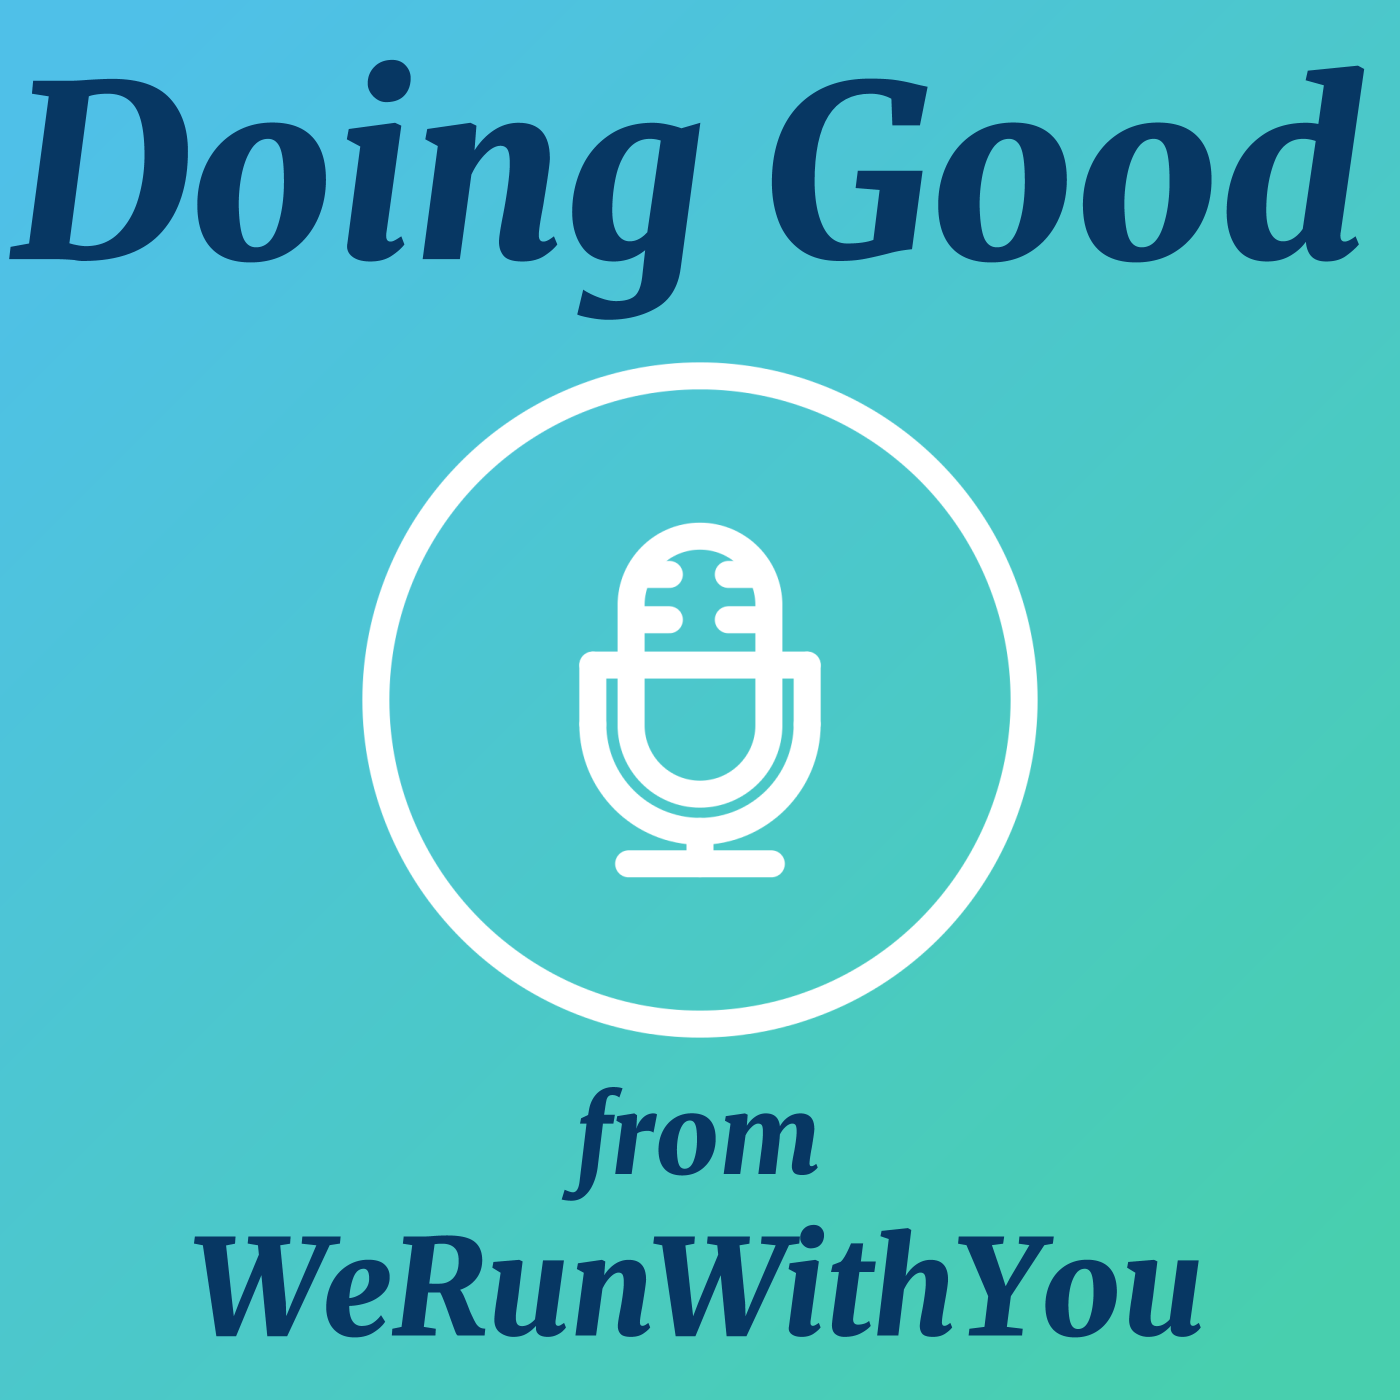 Doing Good from WeRunWithYou